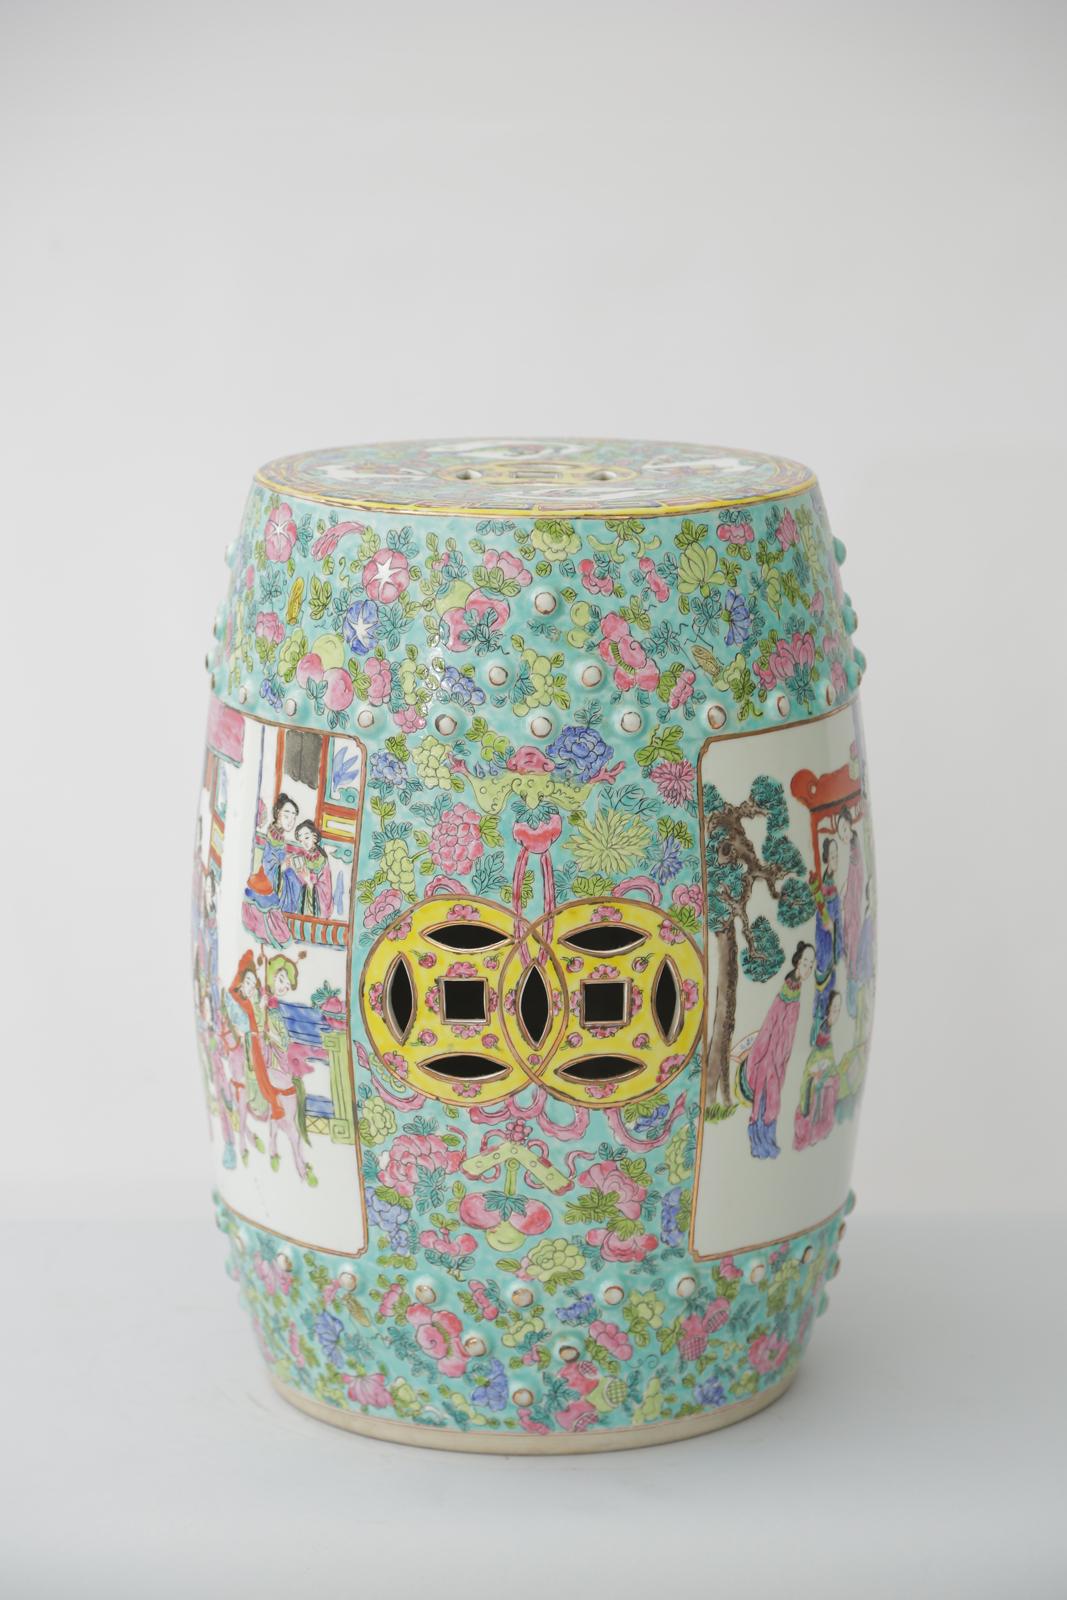 20th Century Chinese Famille Rose Garden Stool c. 1900 For Sale